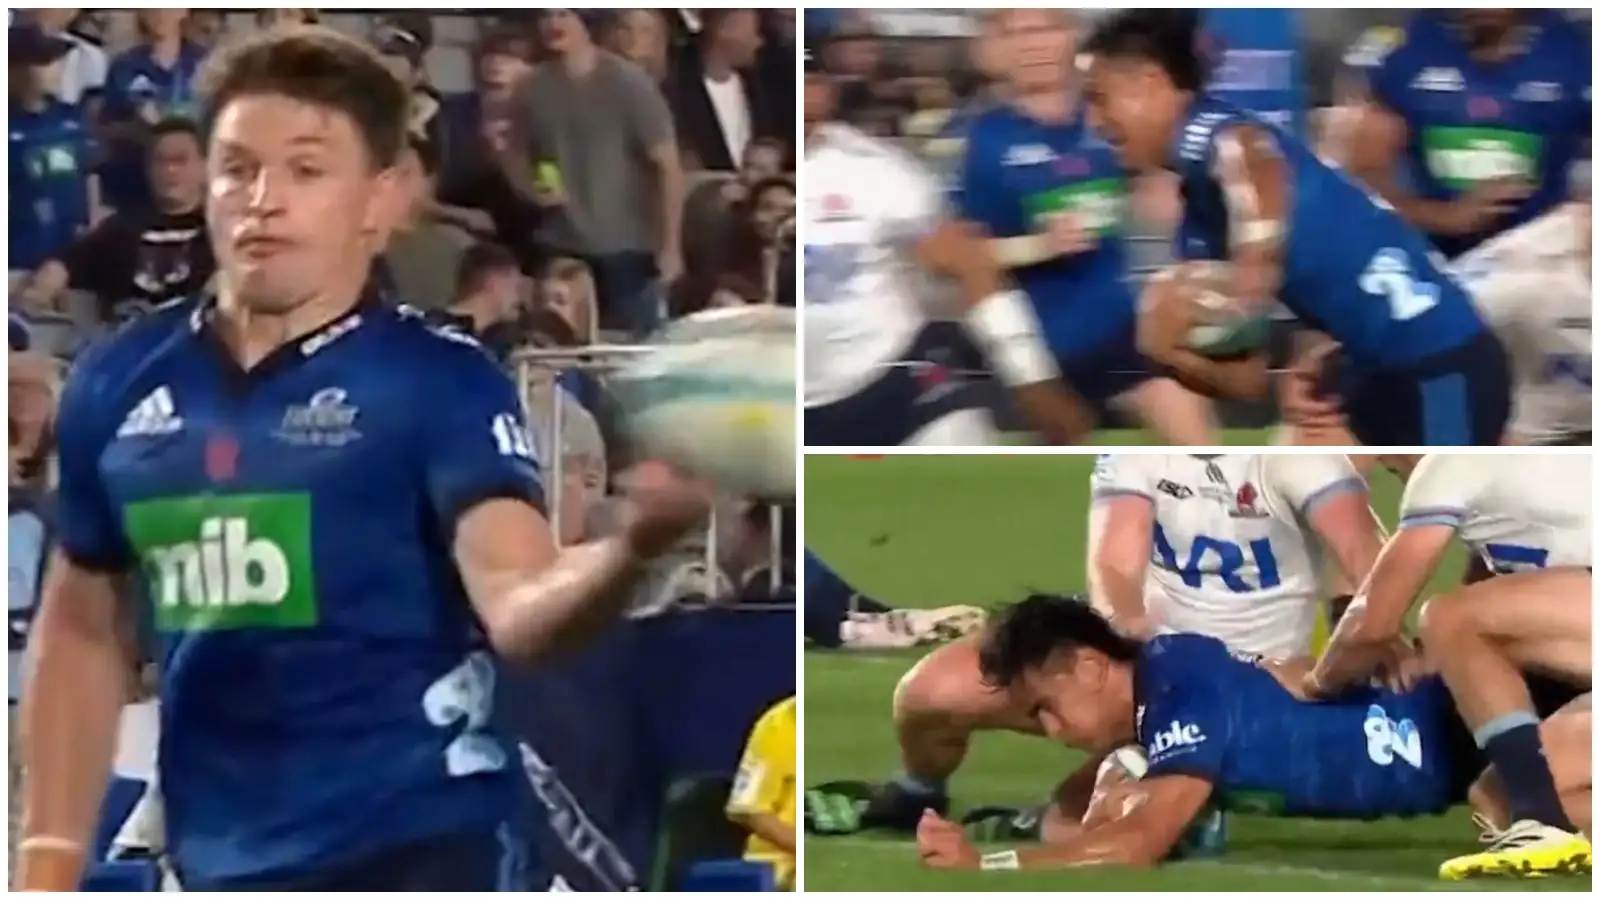 WATCH: Beauden Barrett with superb try assist in Blues’ victory over Waratahs